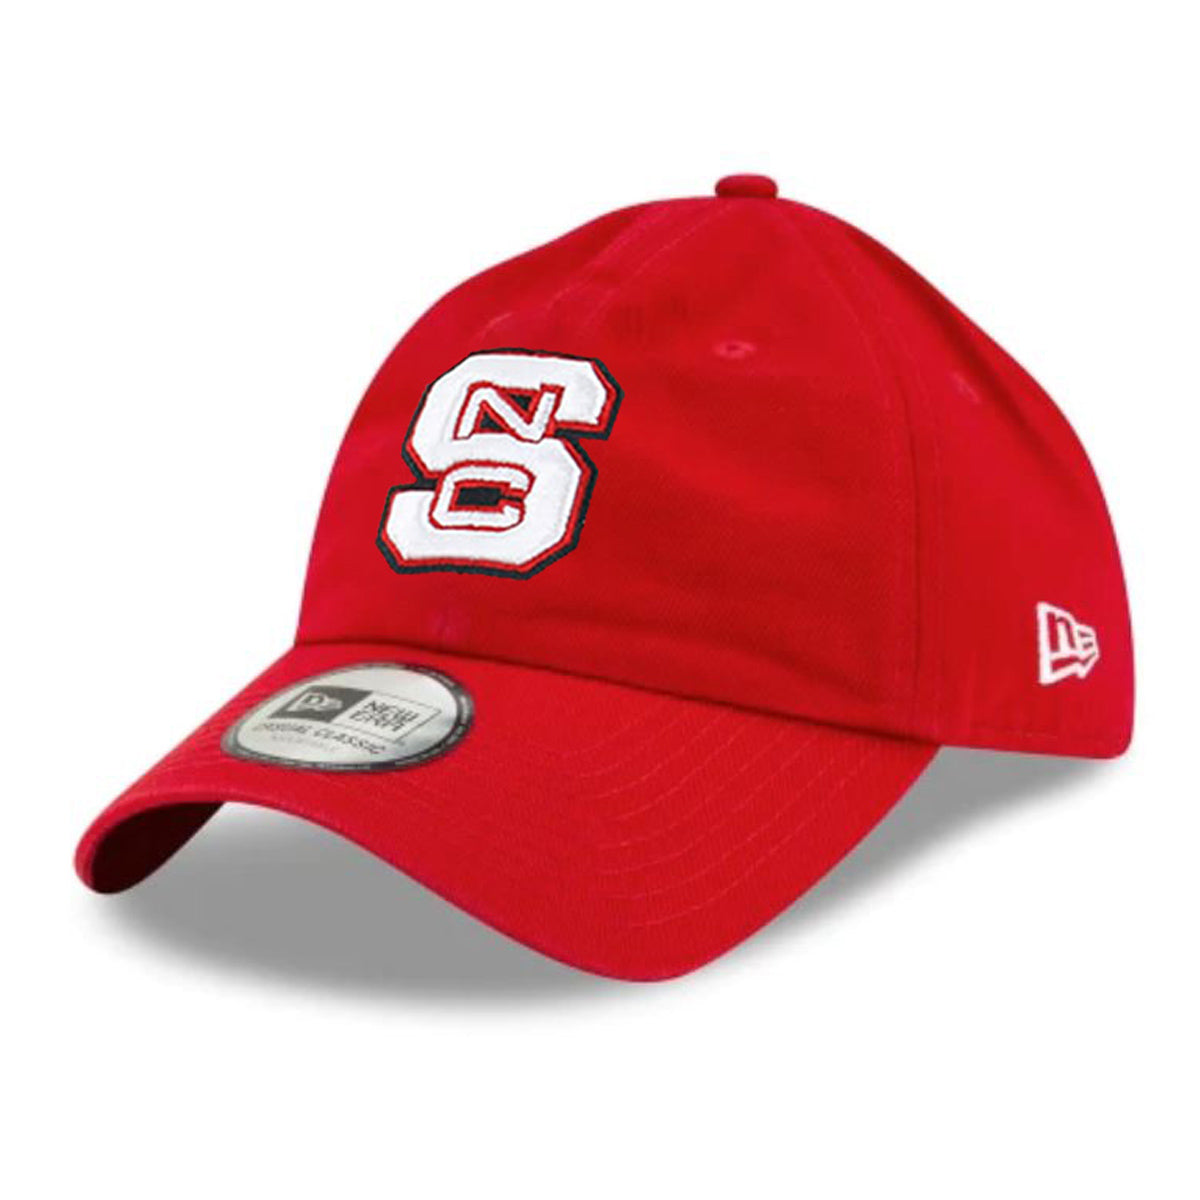 NC State Wolfpack New Era Red Block S Adjustable Hat